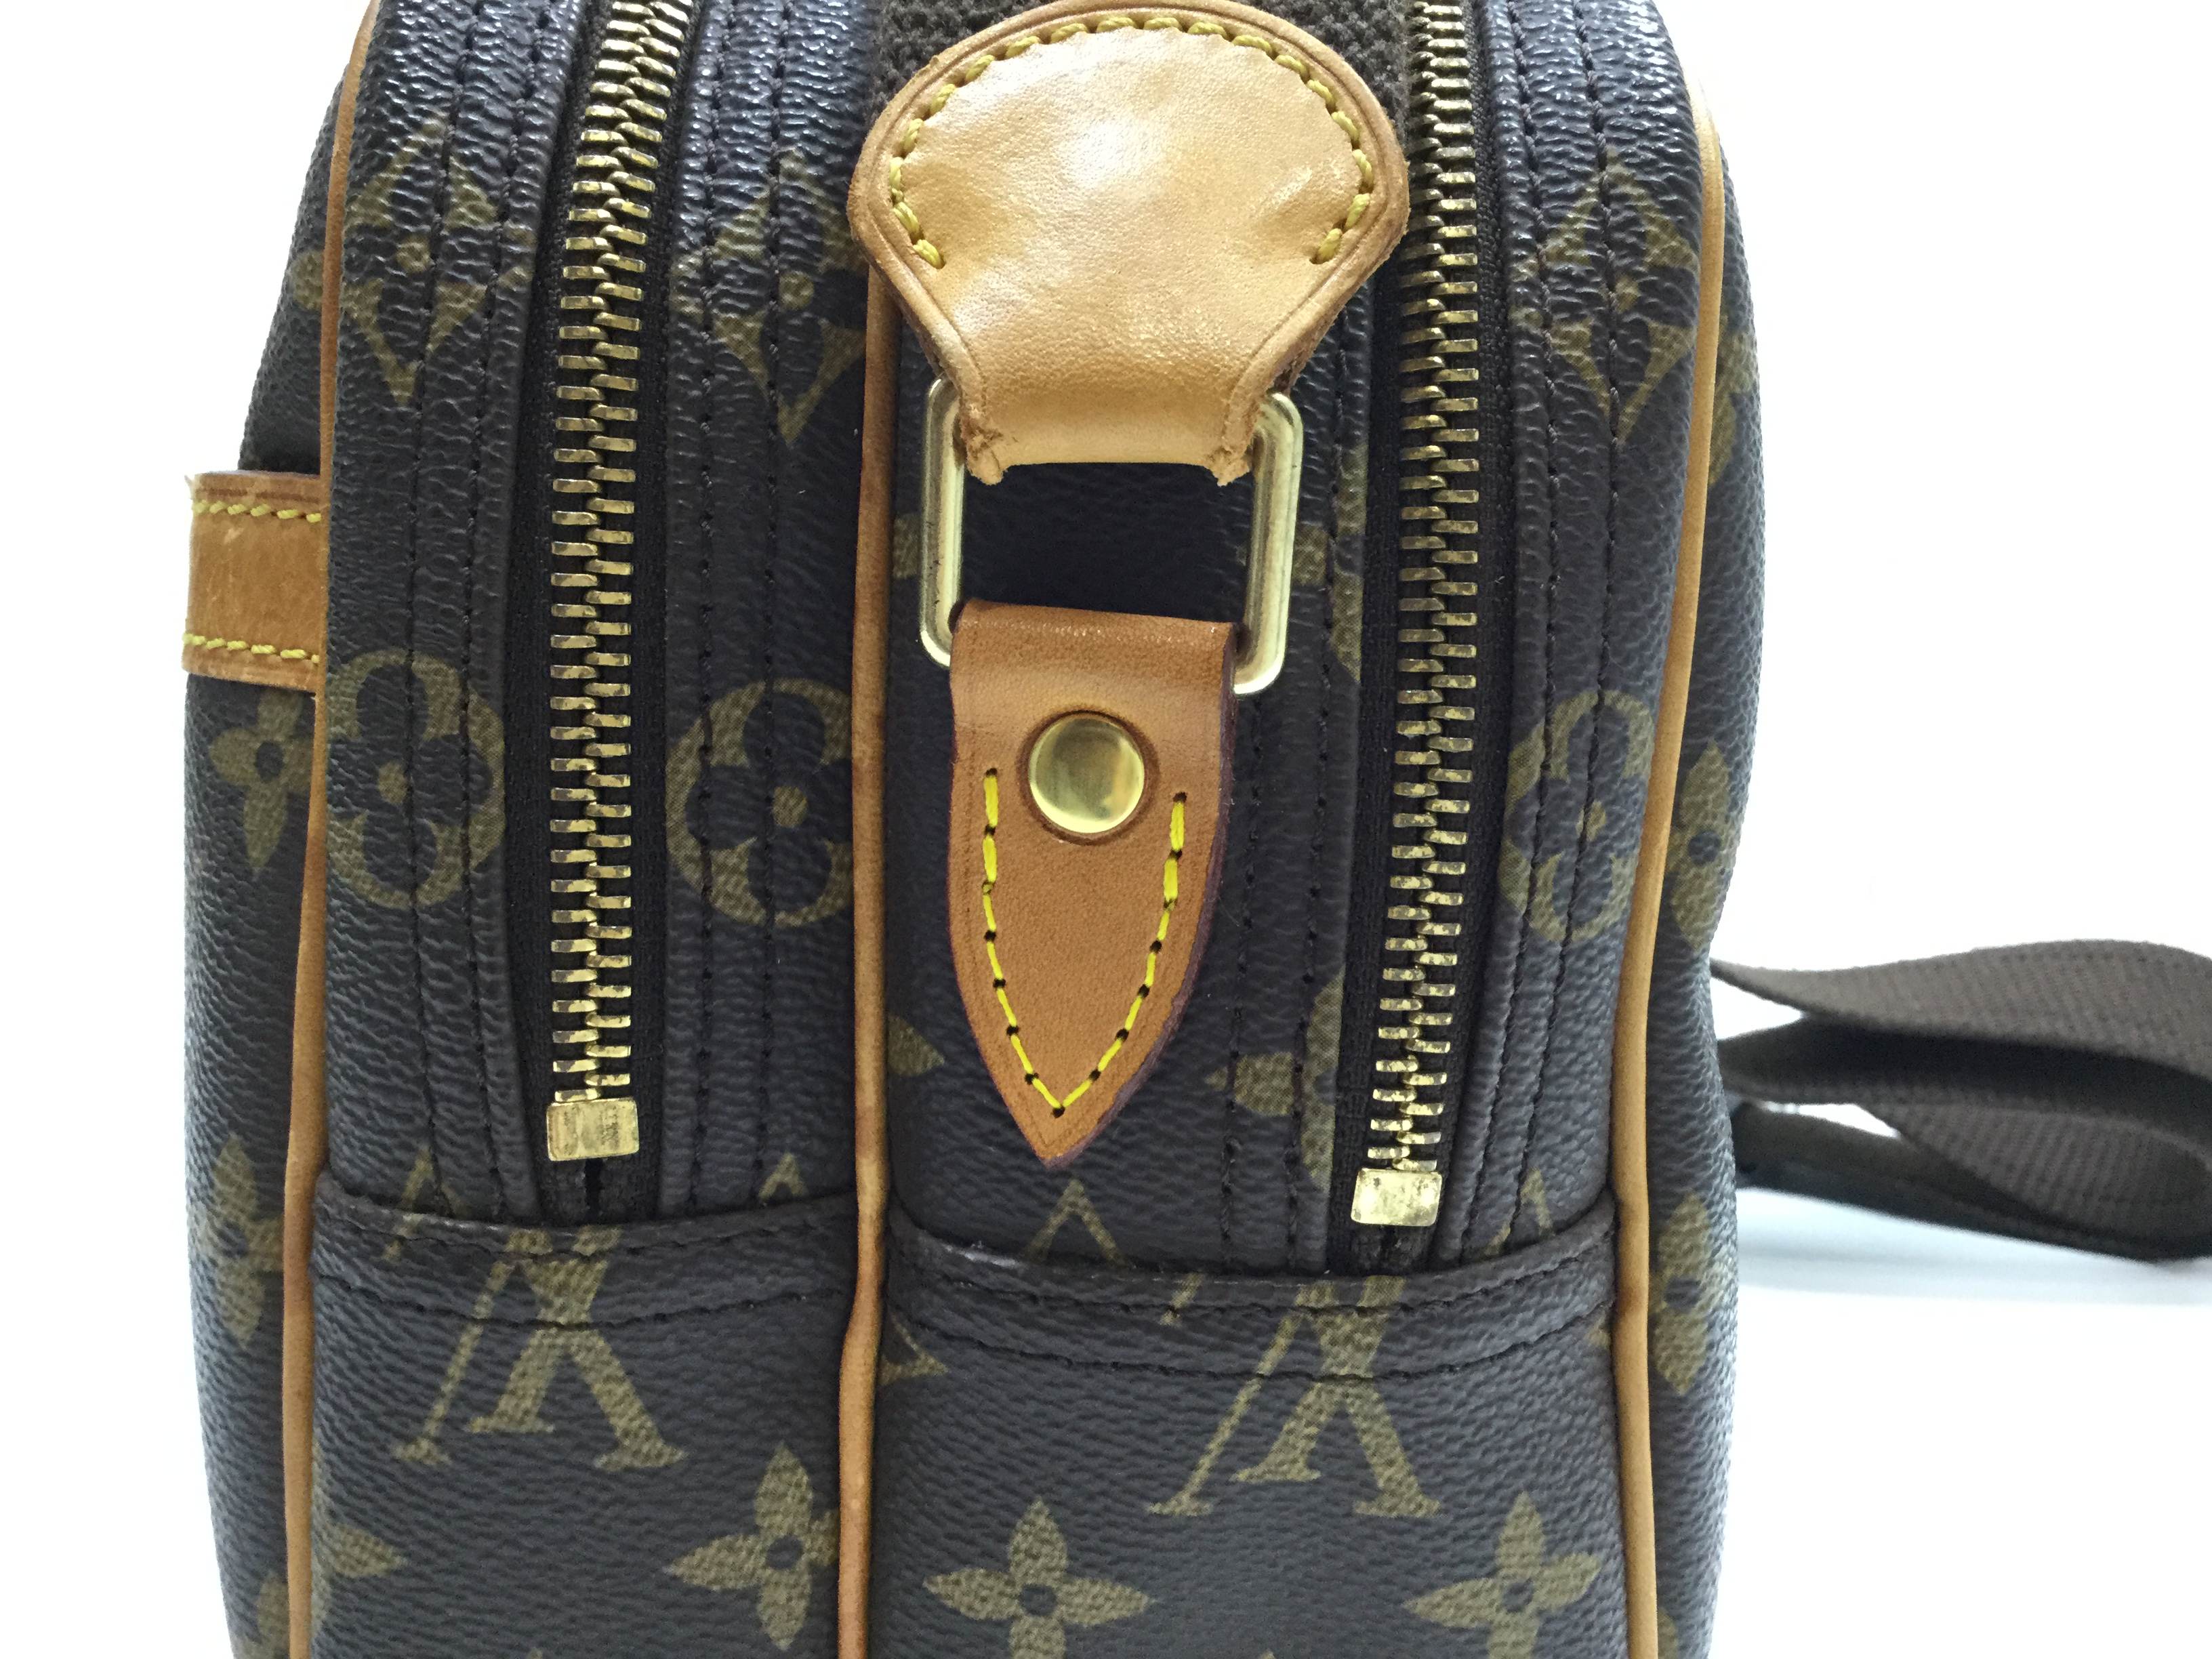 LOUIS VUITTON（ルイ・ヴィトン）のバッグのループ交換が完了しました（愛知県名古屋市M様）after02